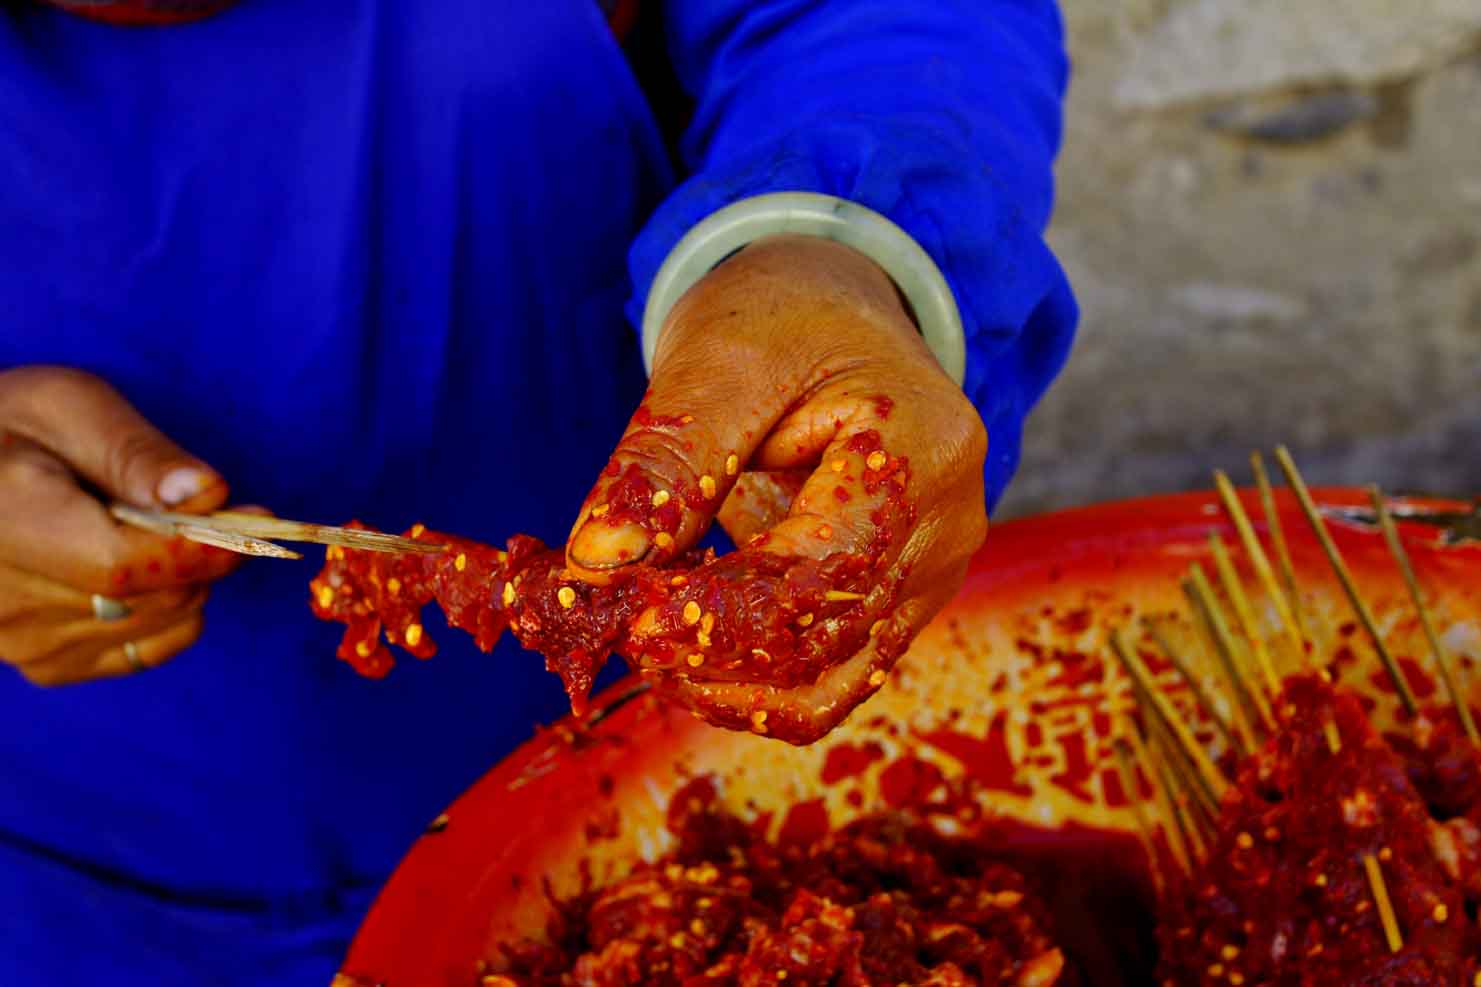 Preparring meat with hot peppers for cooking. Dali, China.